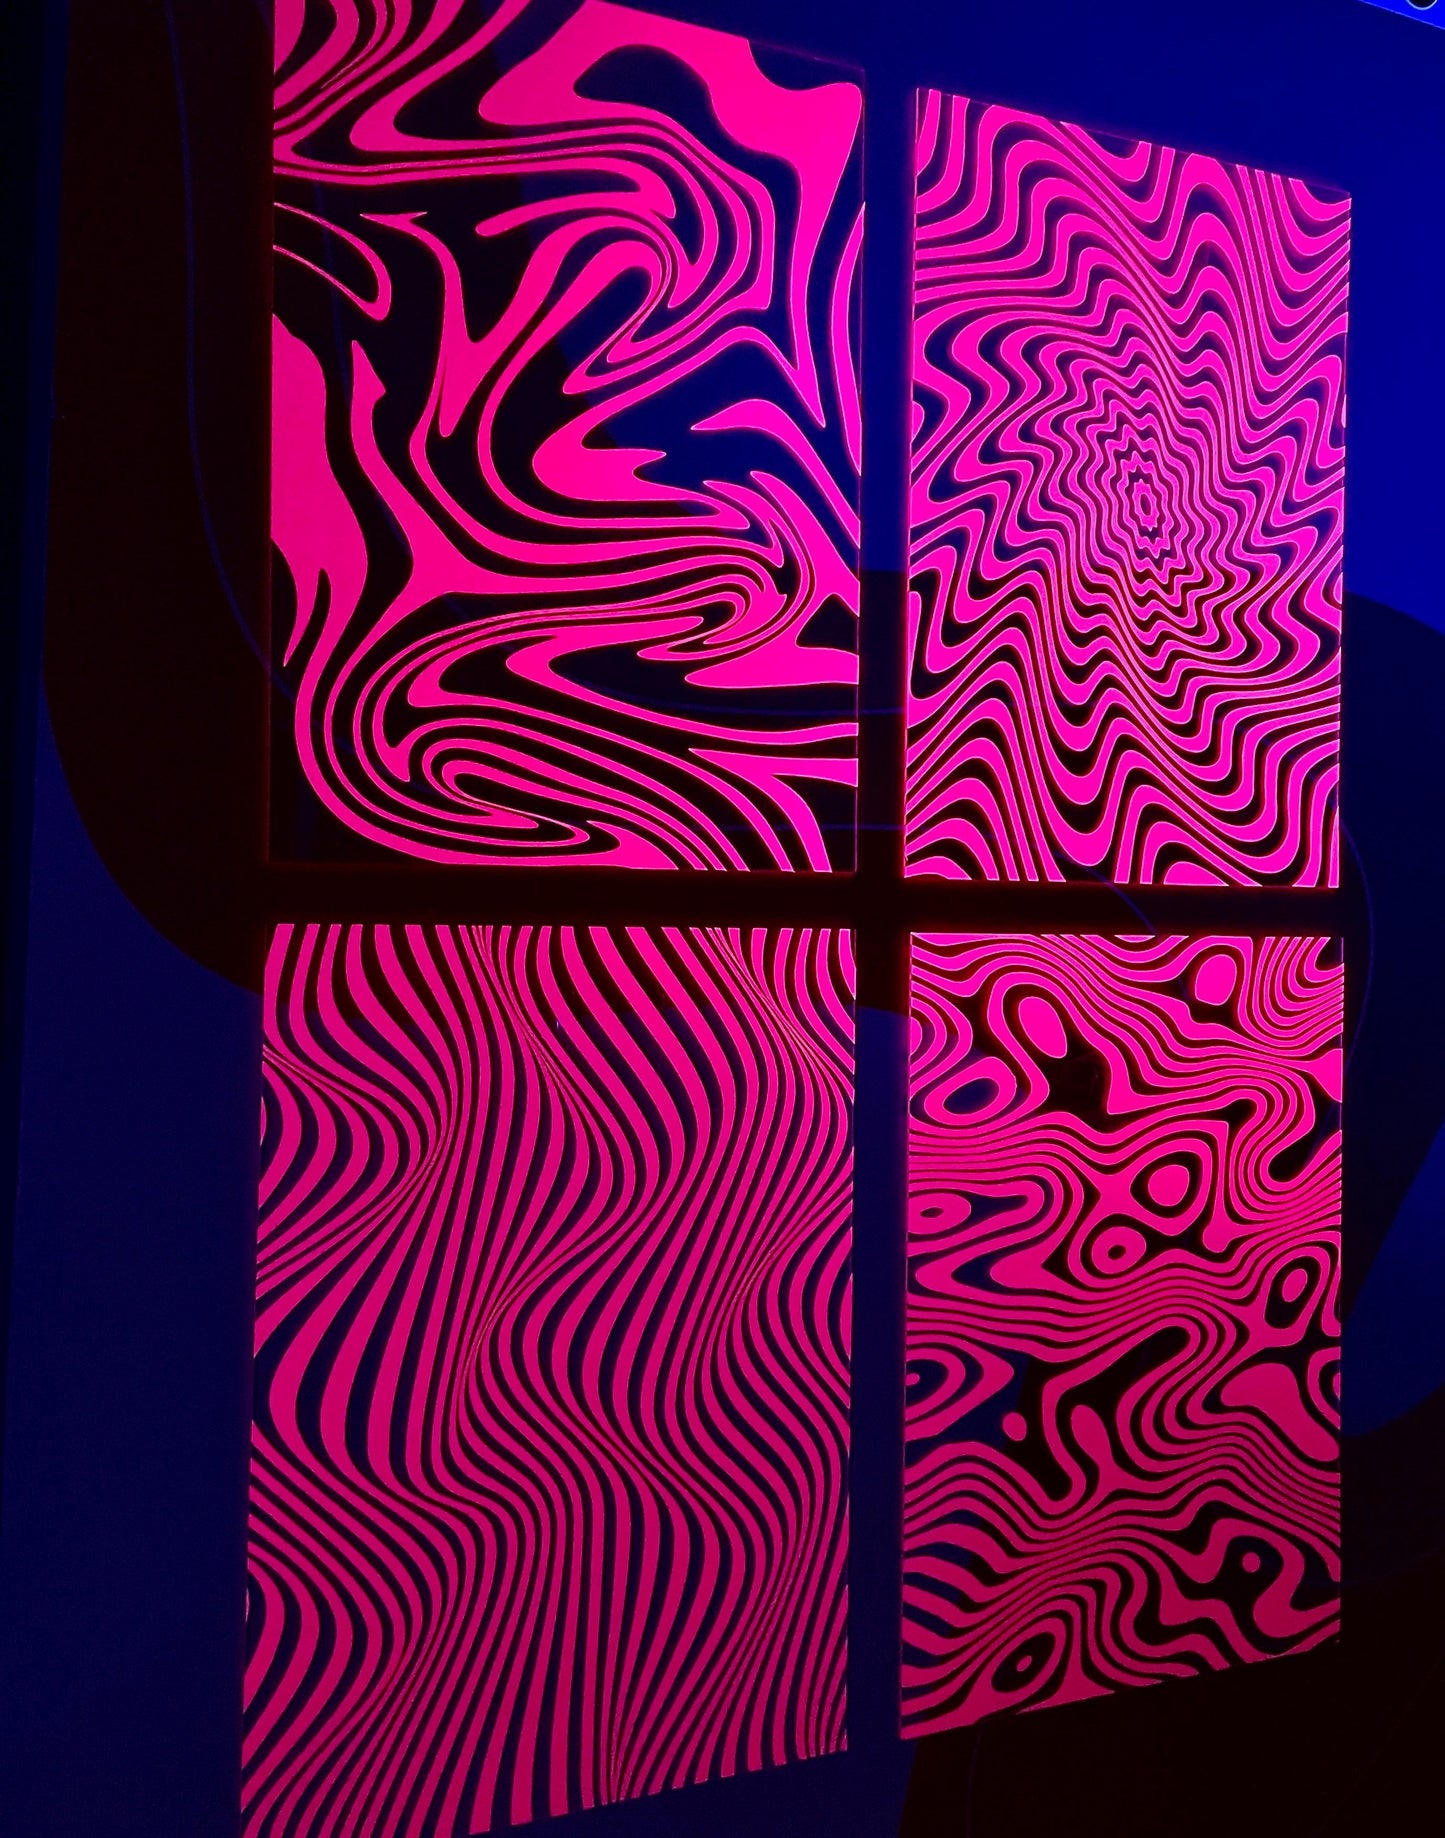 Psychedelic 70's swirly pattern trippy UV glow pink clear acrylic vinyl poster plaque